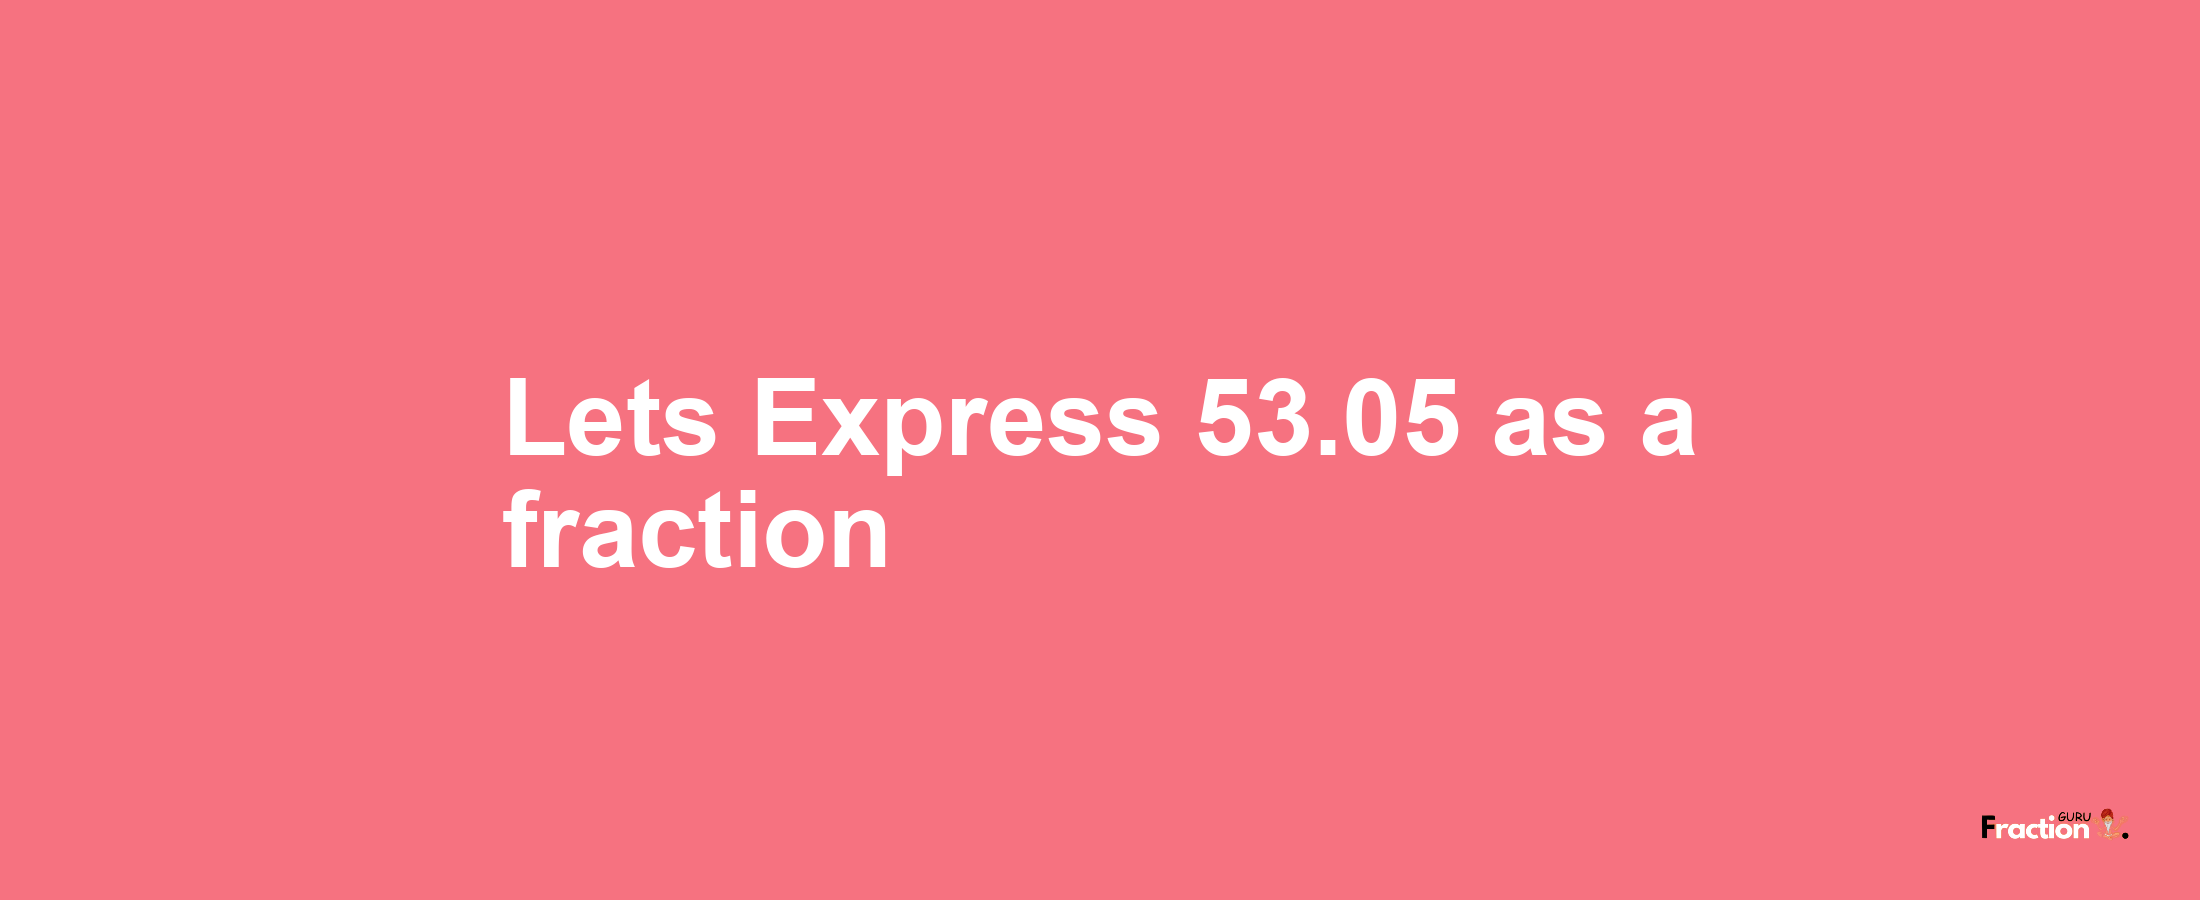 Lets Express 53.05 as afraction